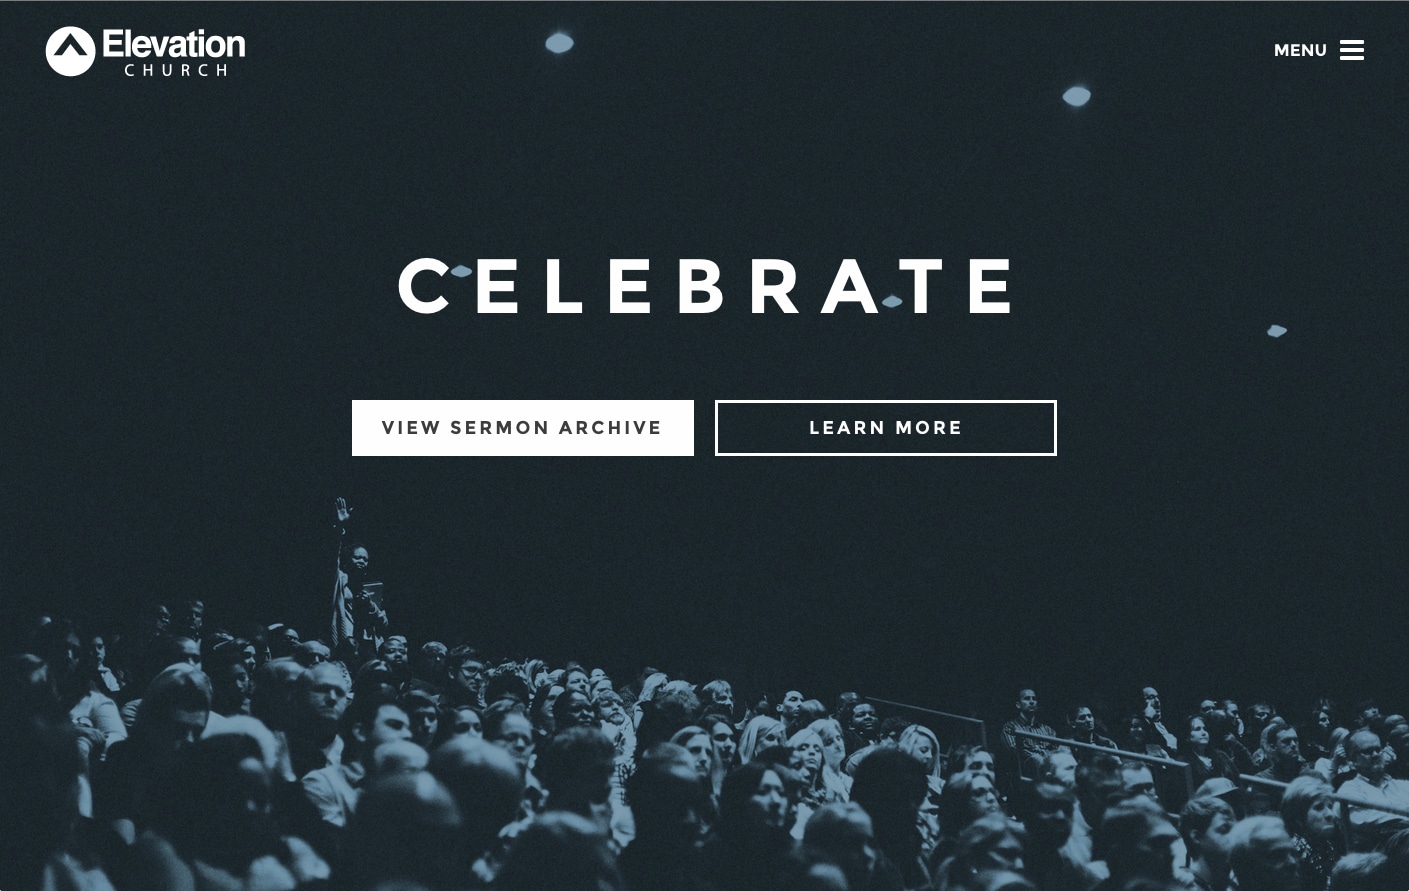 Website review: Elevation Church’s homepage